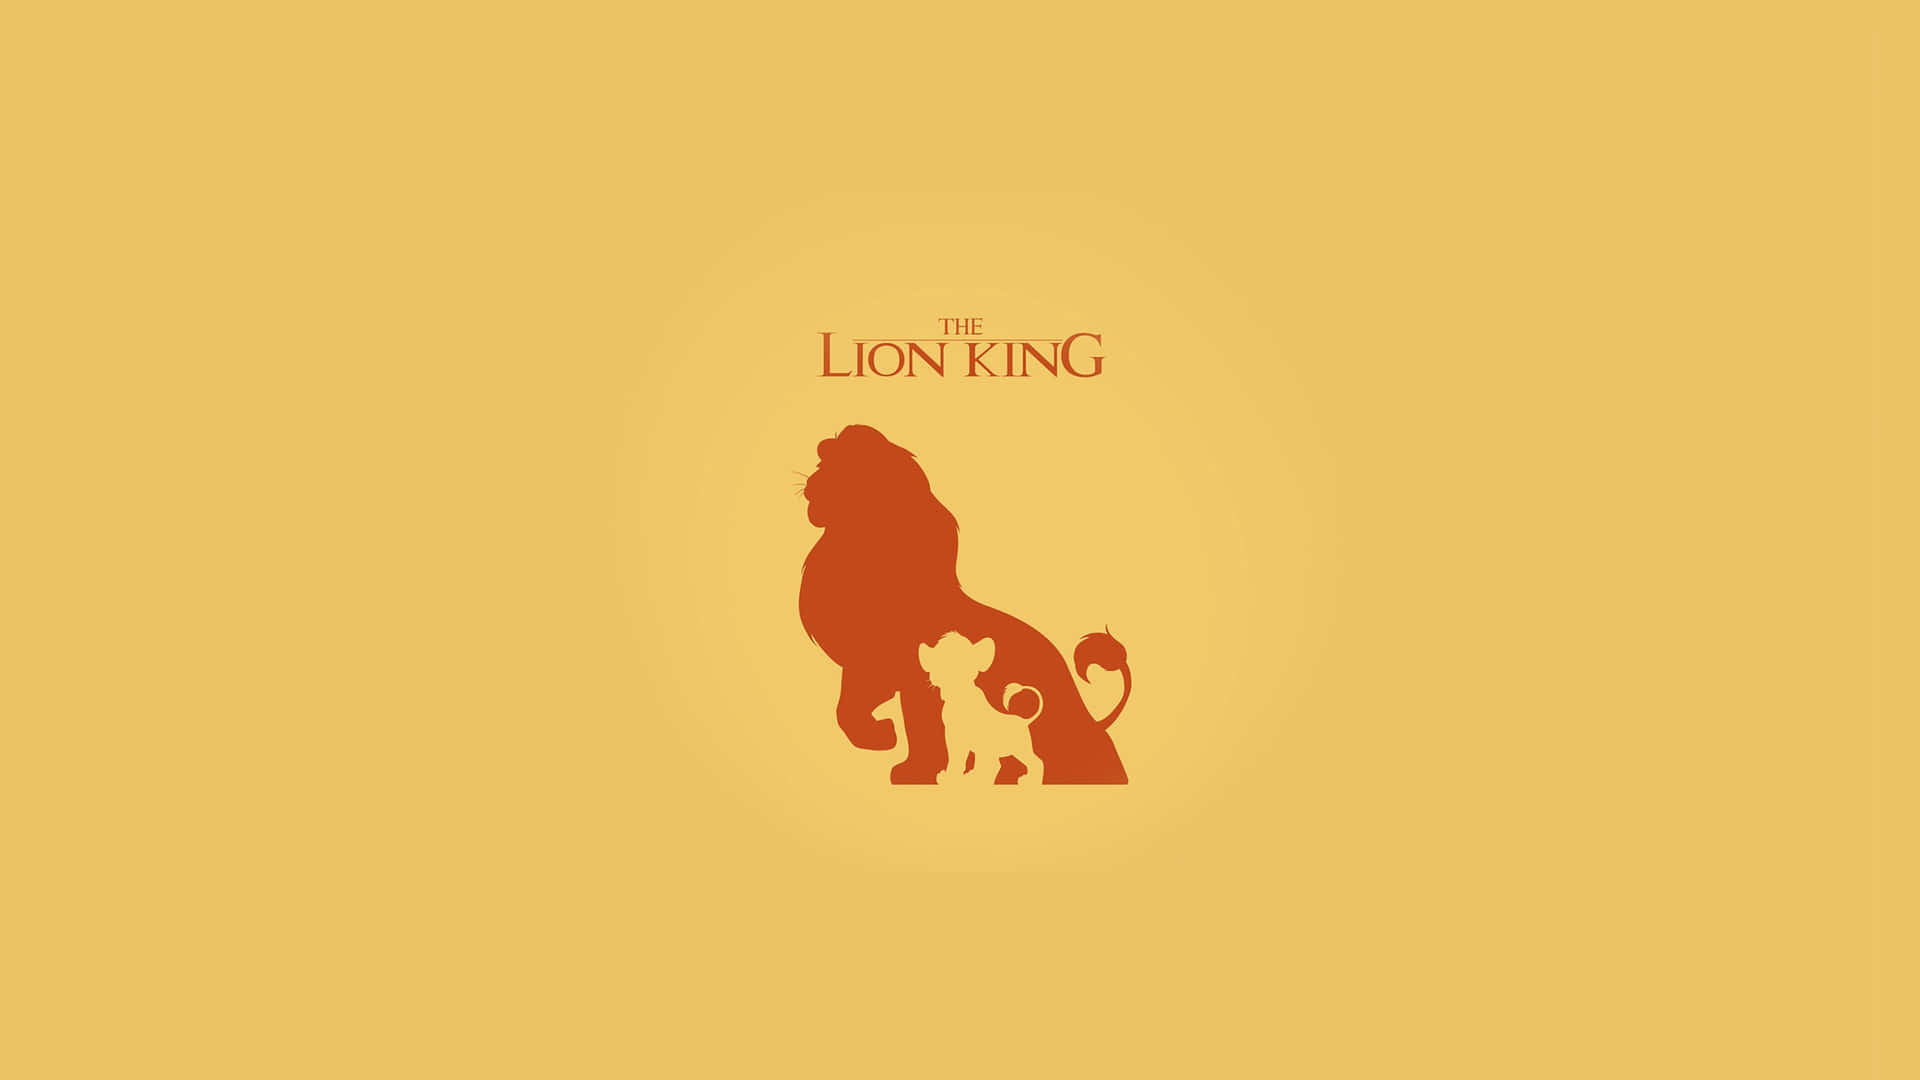 The Lion King Silhouette Art